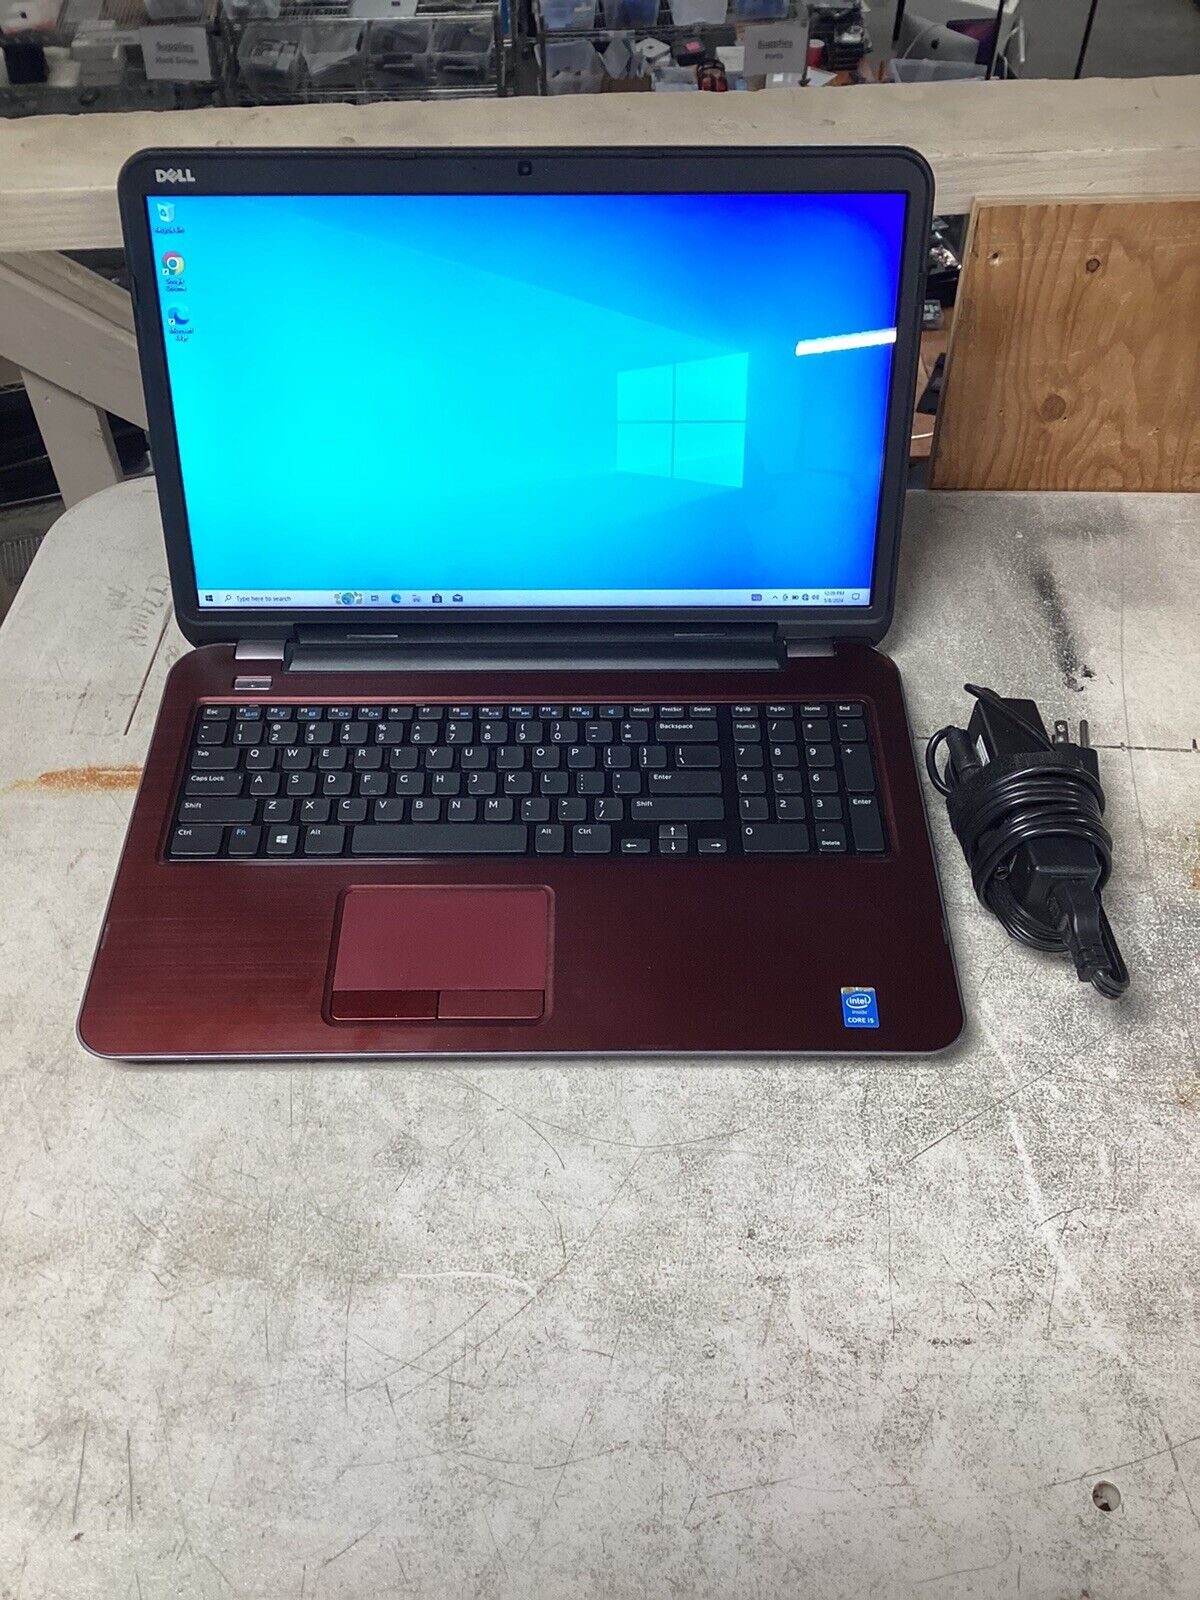 DELL INSPIRON 17R-5737 (Core i5-4200U @1.60GHz 8GB RAM 256GB SSD) *Not Activated